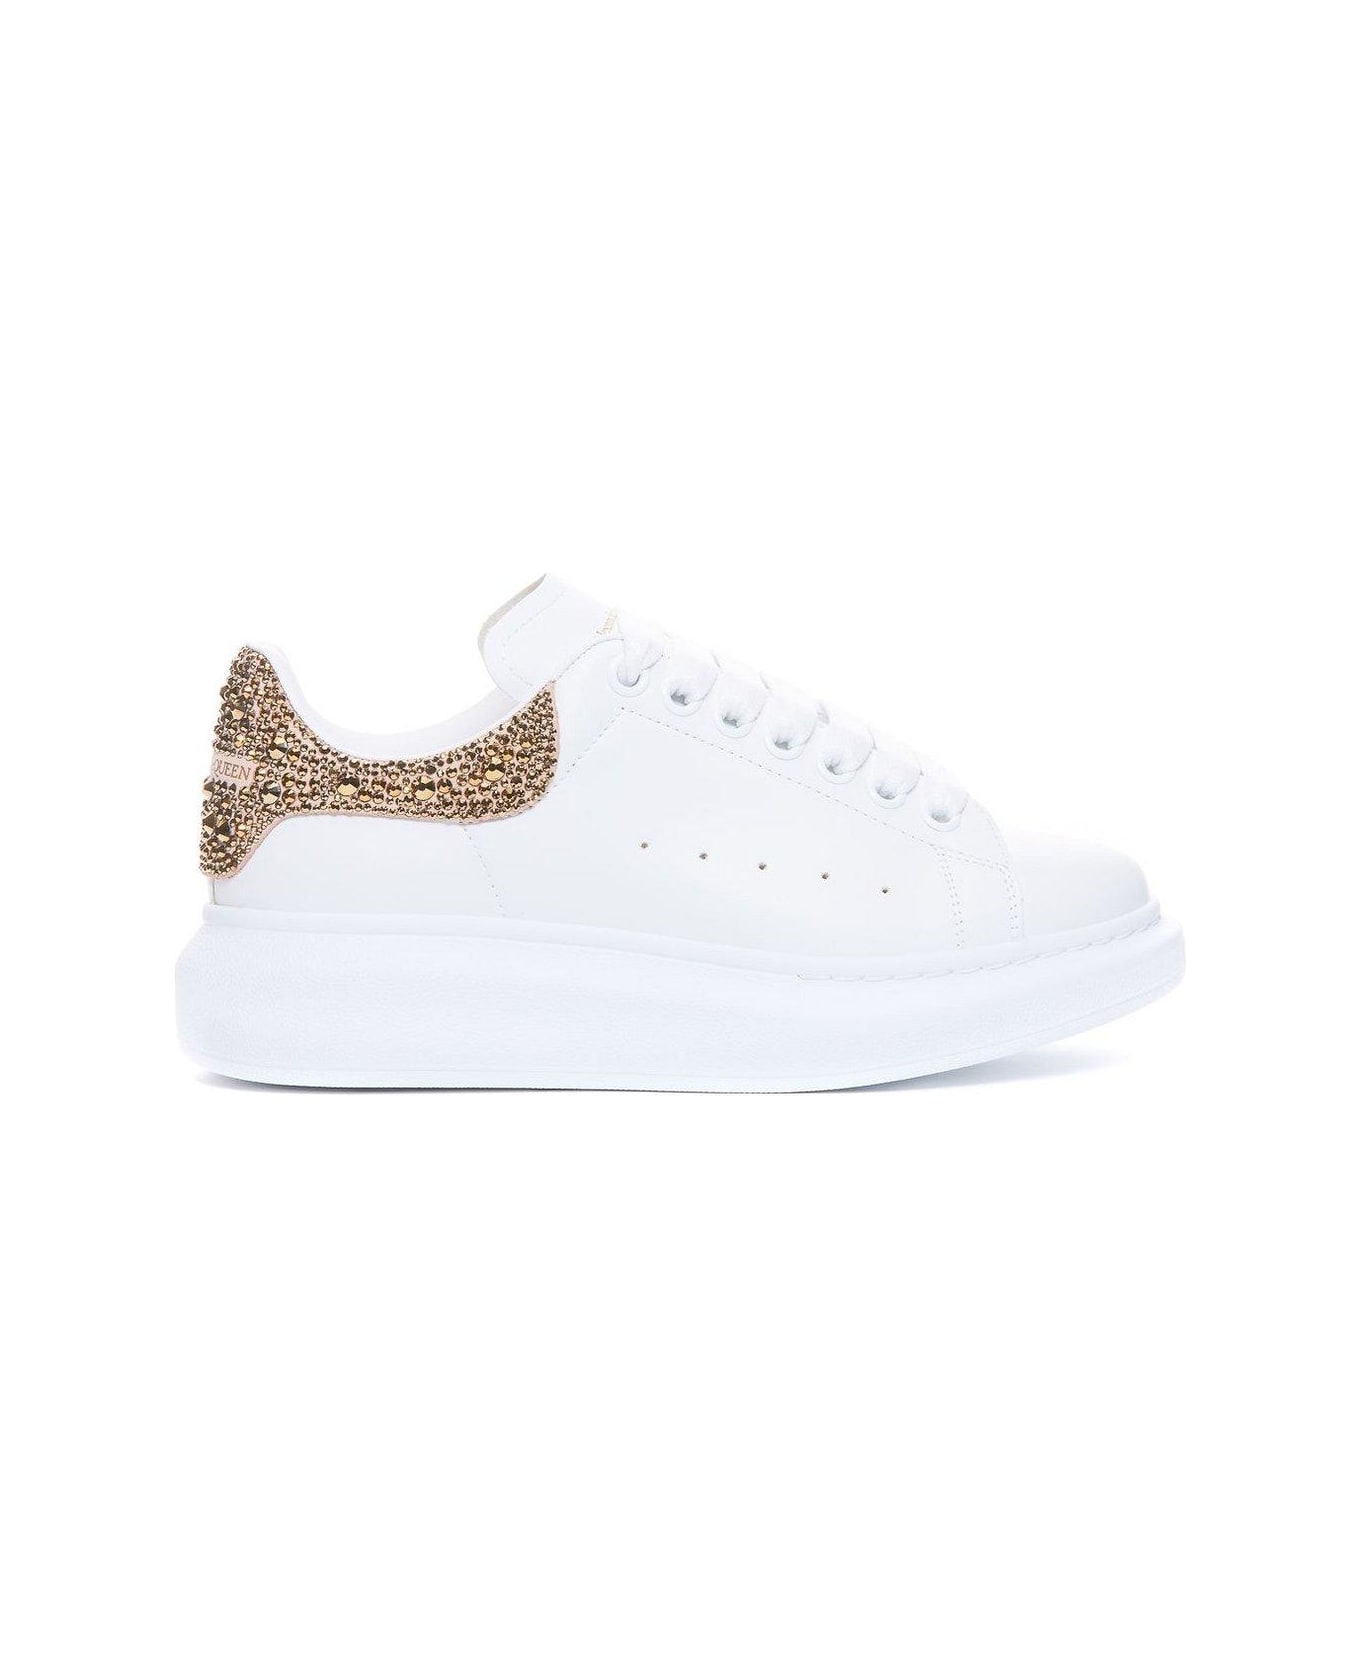 Alexander McQueen Oversized Lace-up Sneakers - White/gold